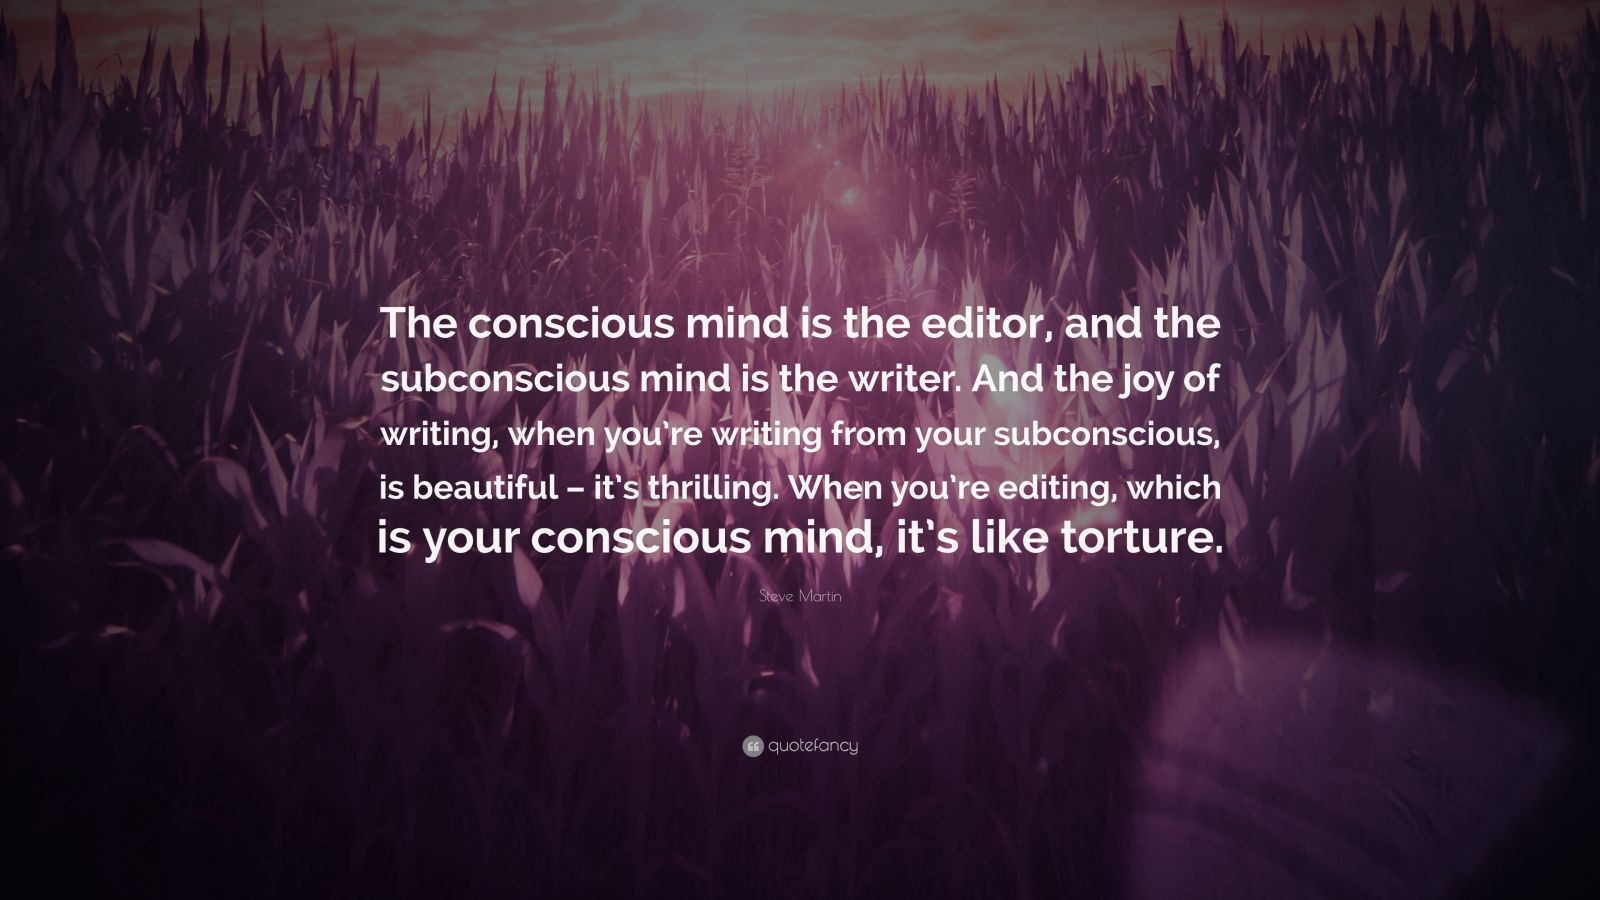 Steve Martin Quote: “The conscious mind is the editor, and the